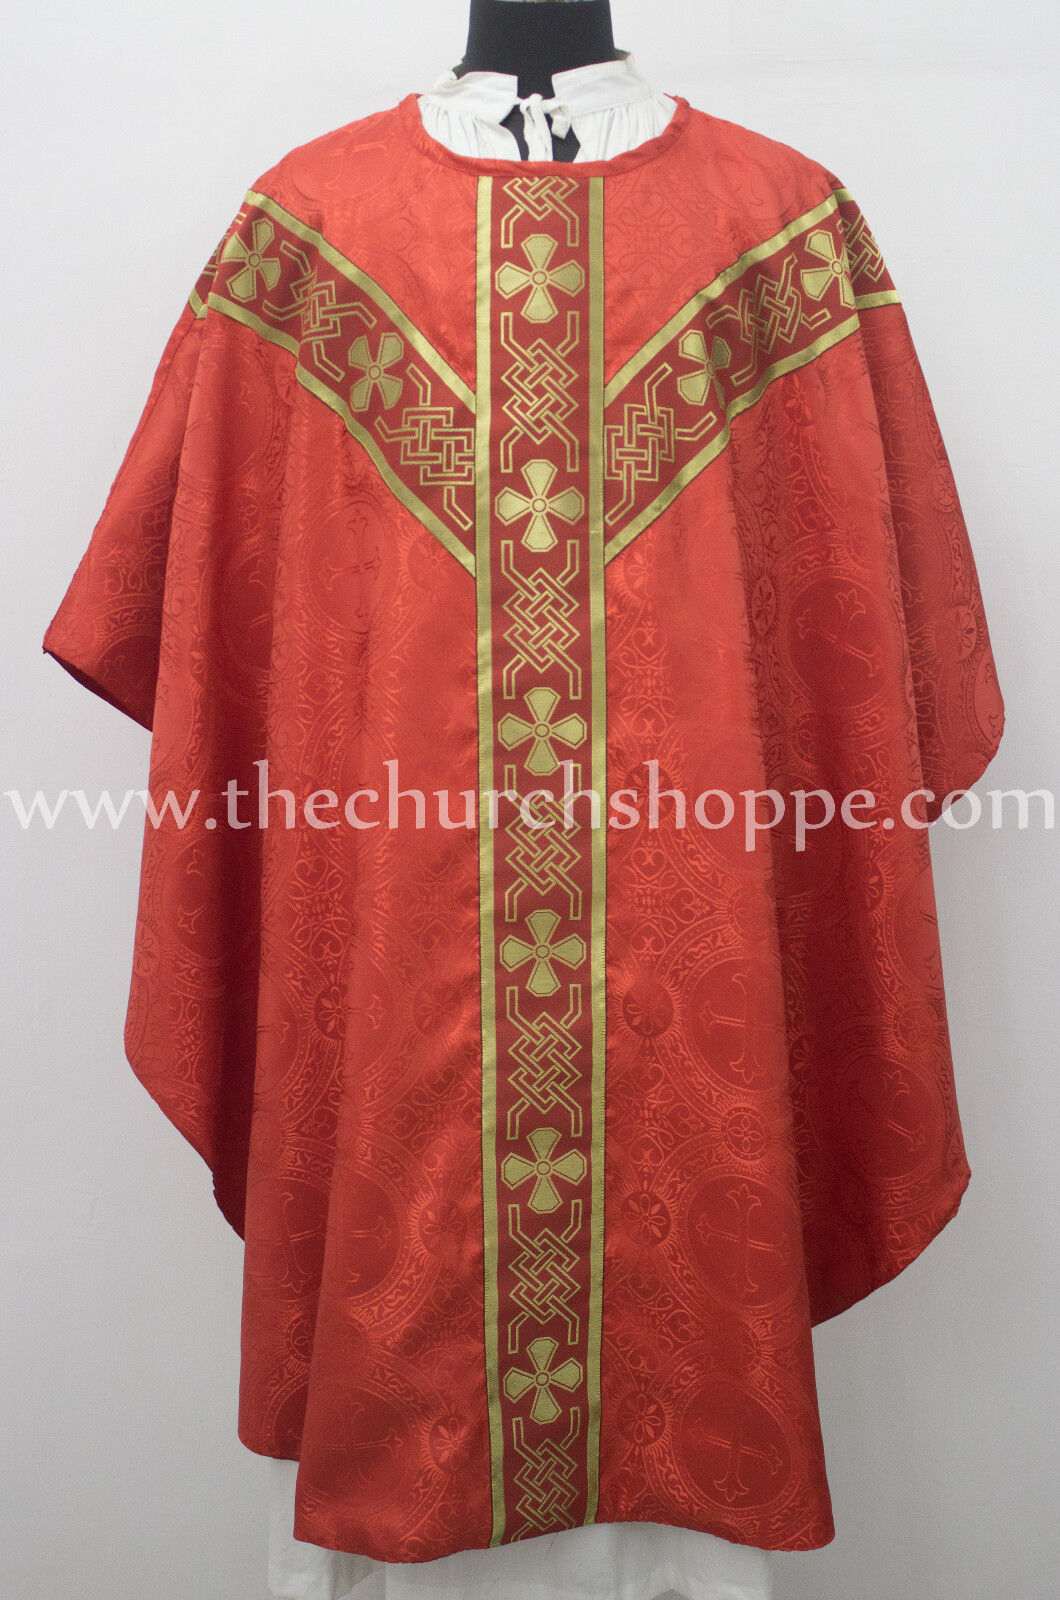 Red Gothic vestment & 5 PC mass and stole set,Gothic chasuble,casula,casel ,IHS 